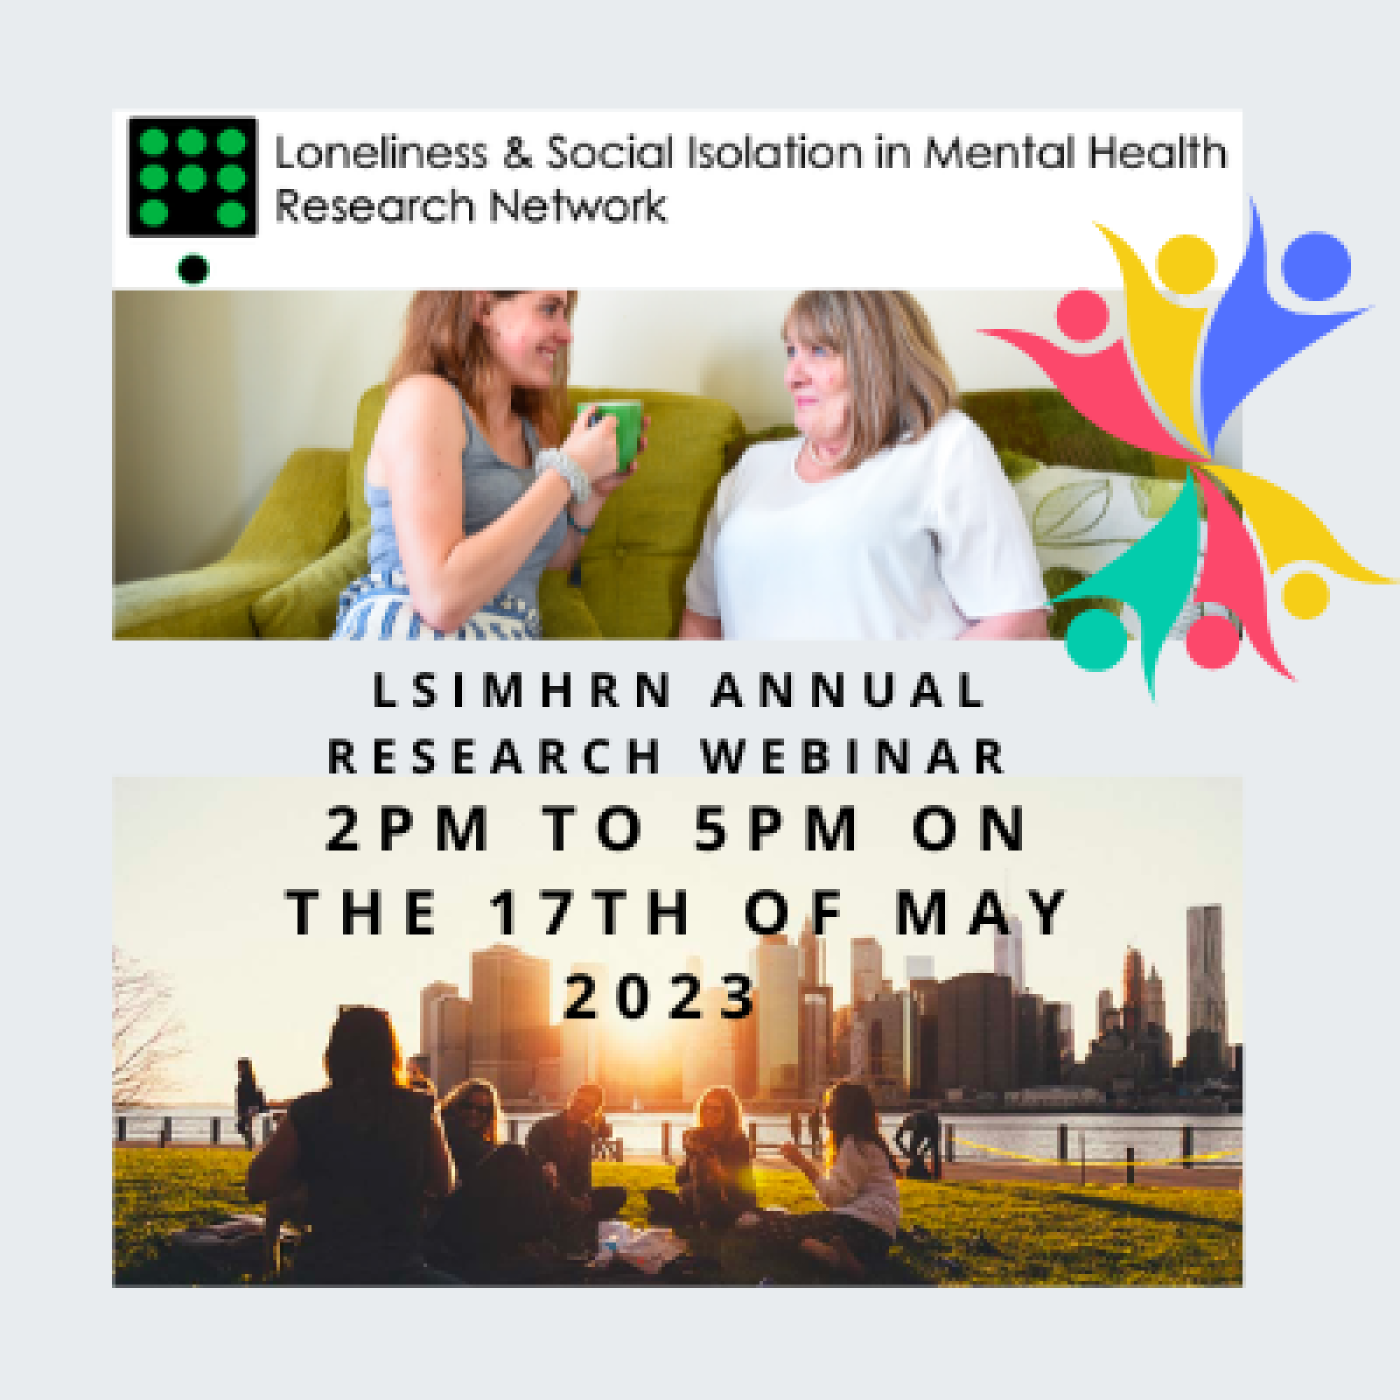 Loneliness and Social Isolation in Mental Health Network Annual Research Webinar 2023